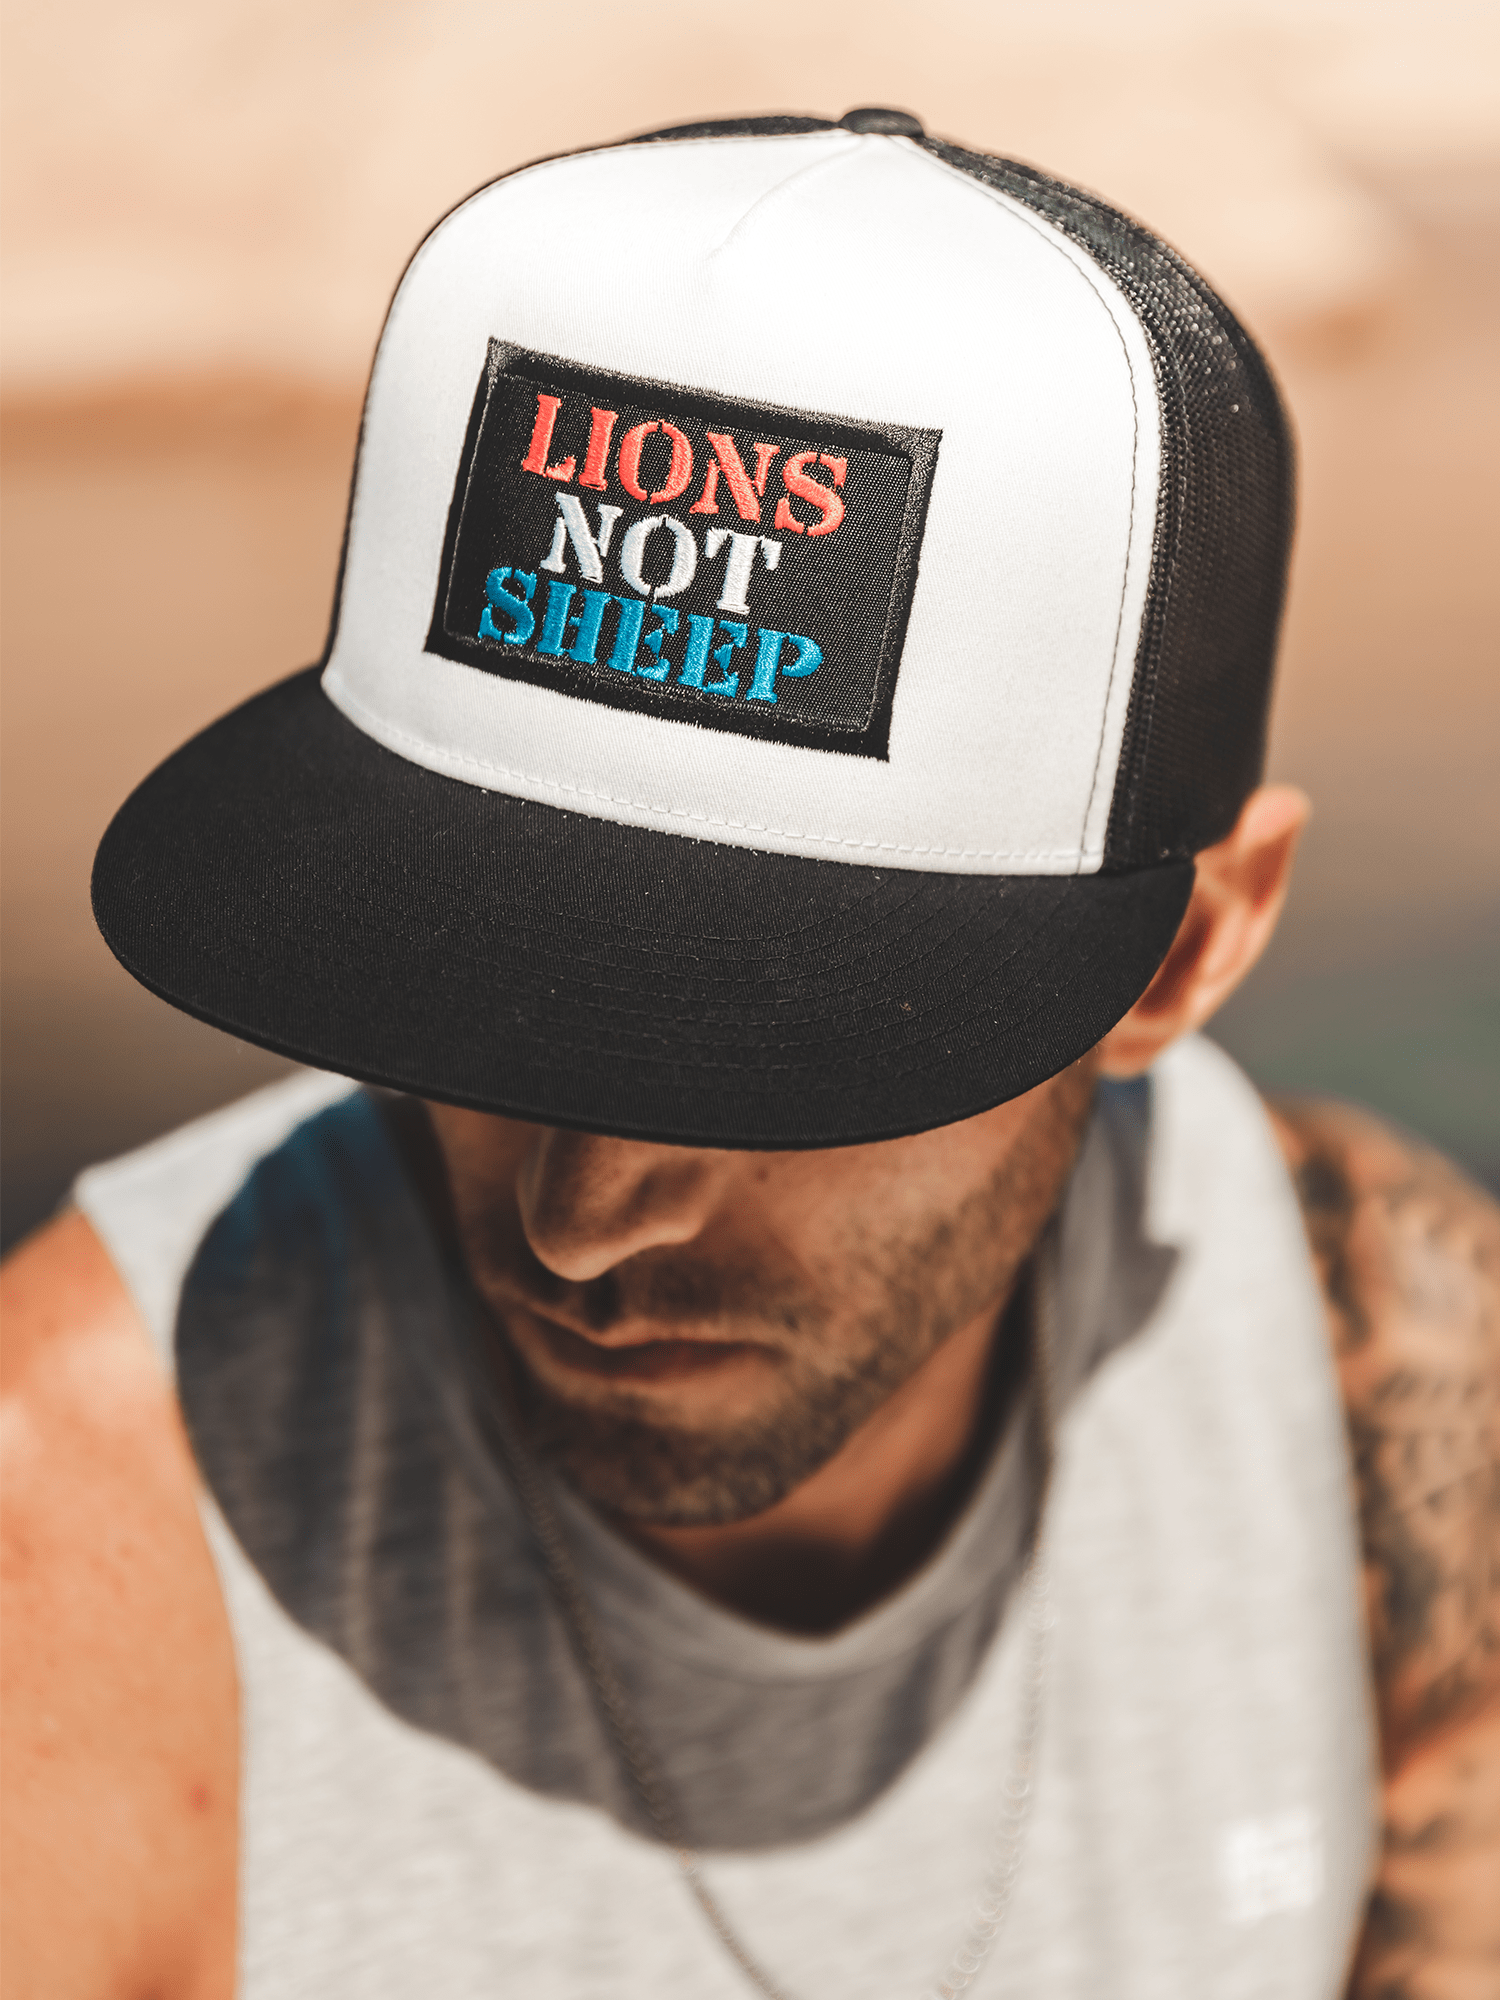 Lions Not Sheep Lions Not Sheep OG Hat (White / Black - Red, White & Blue)